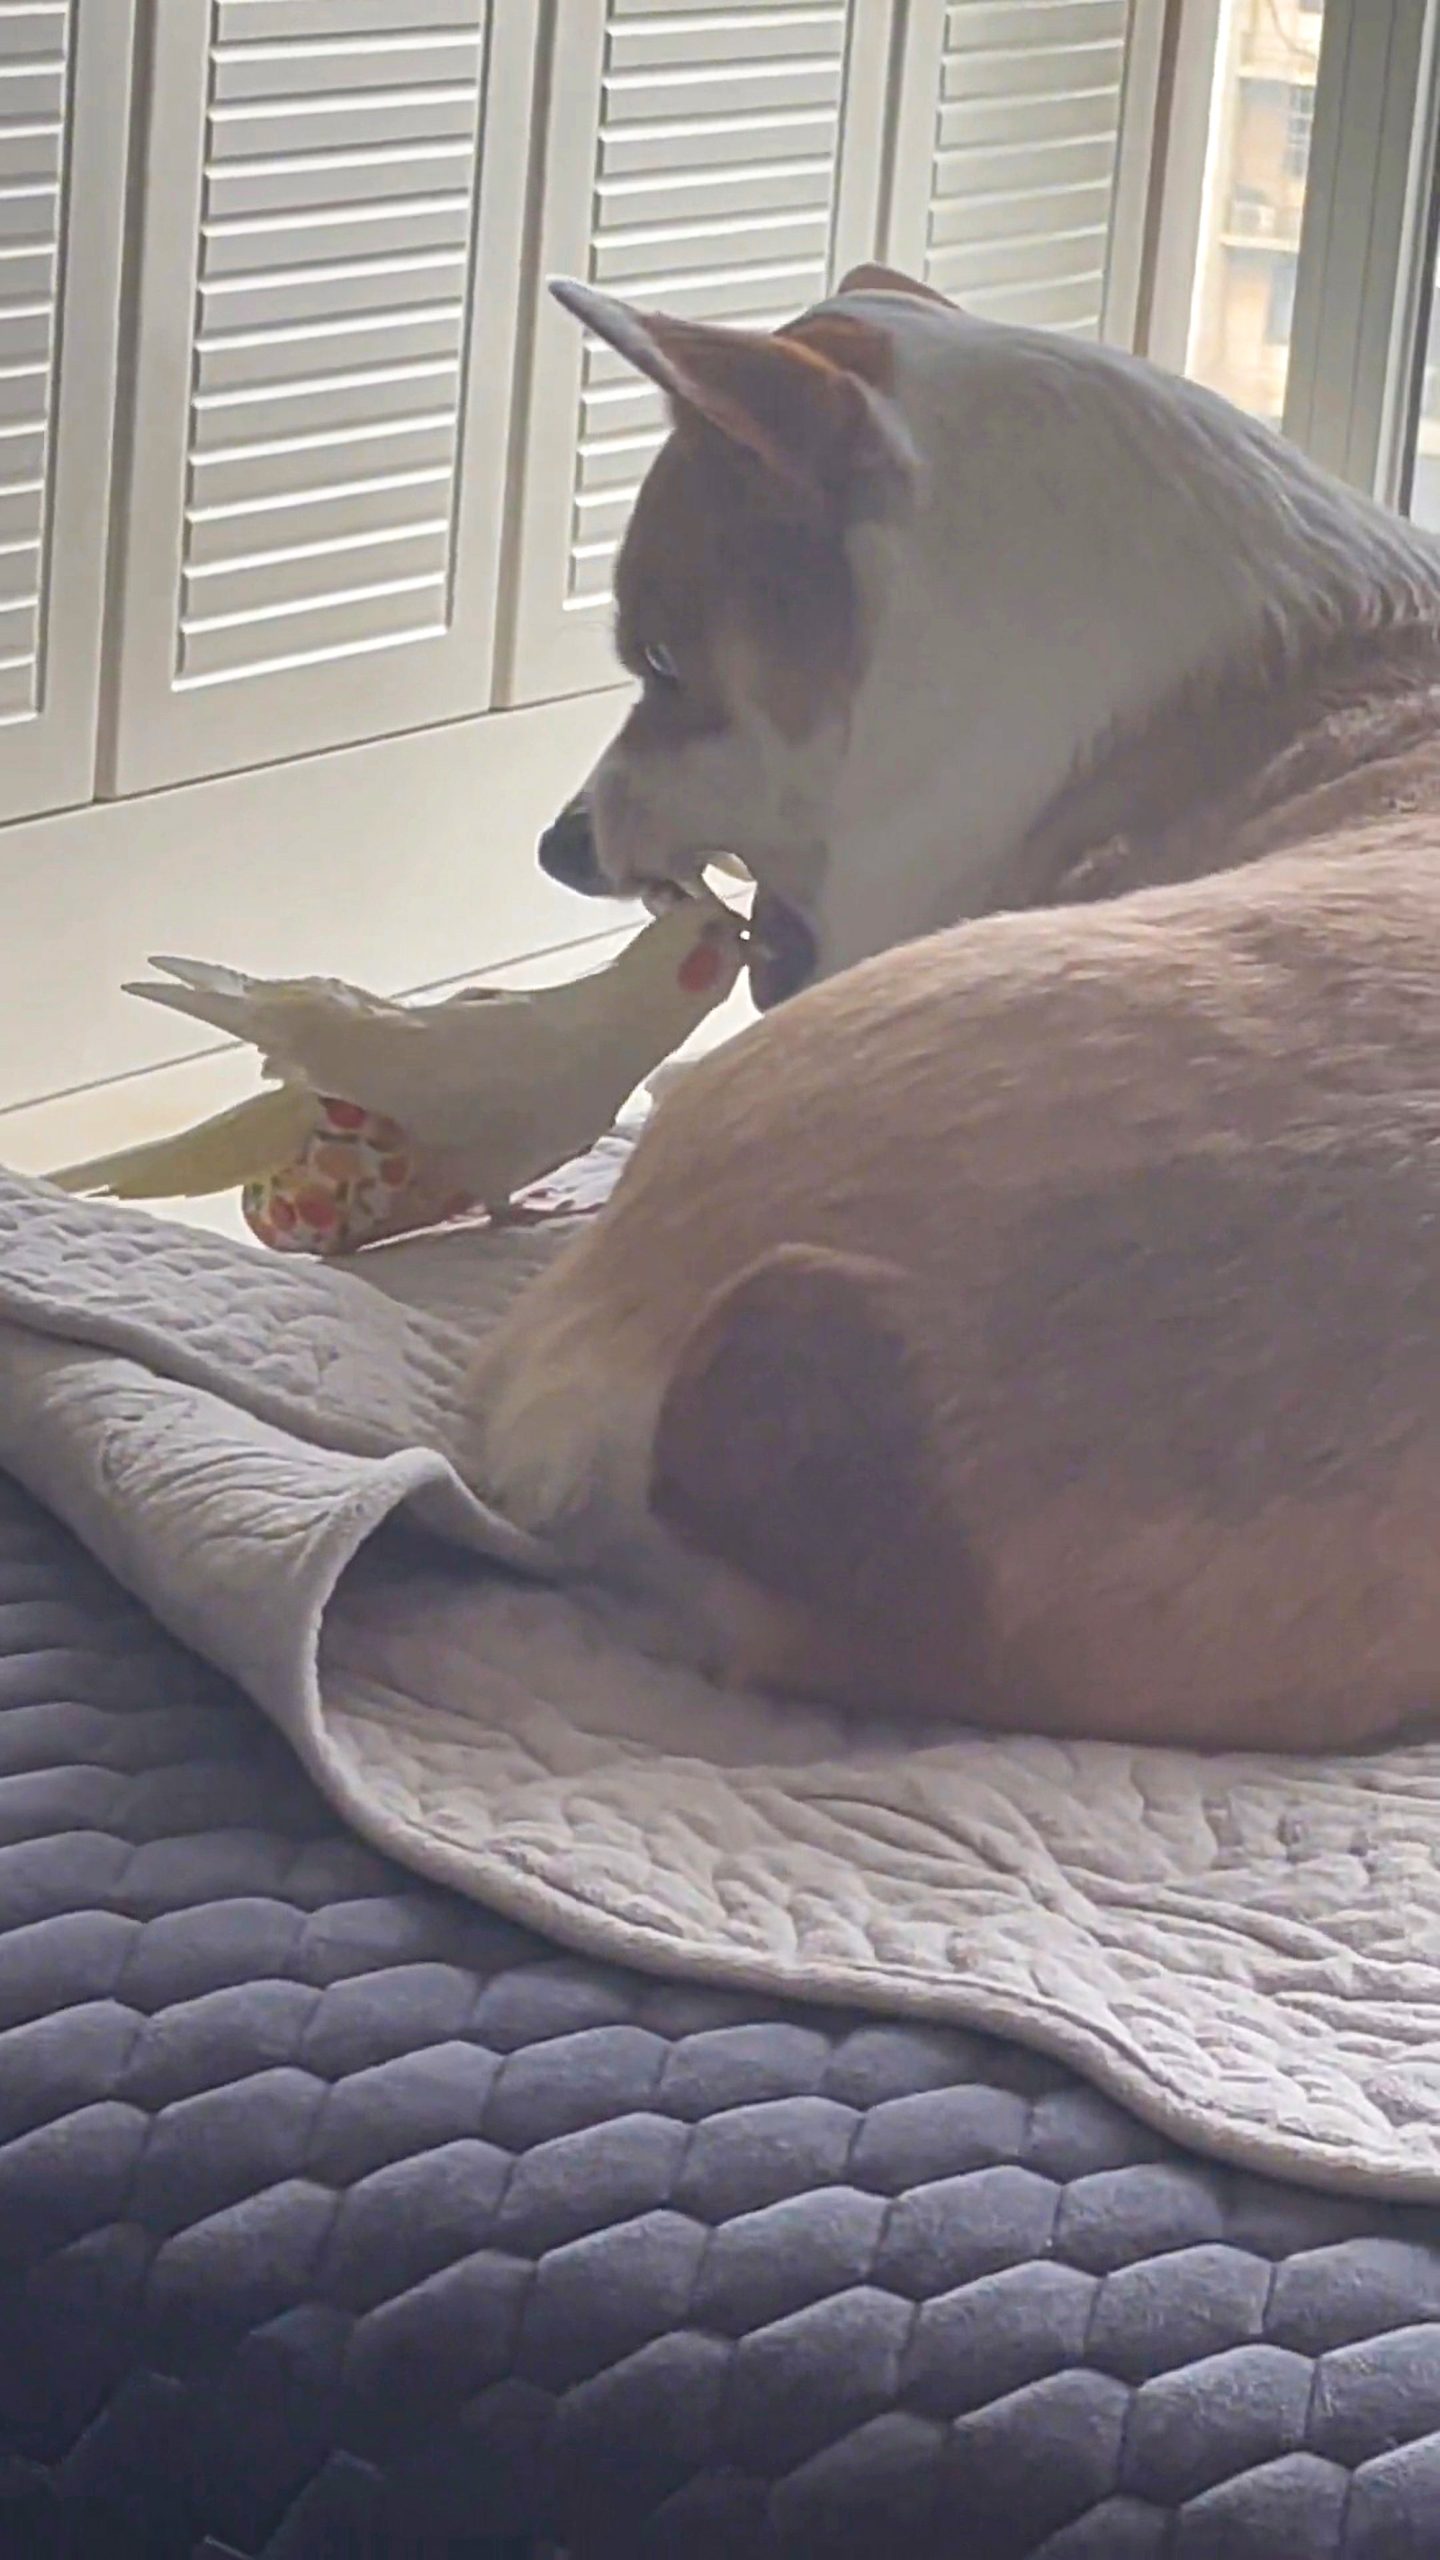 Read more about the article Cute Bird Uses Beak To Provide Teeth Scrubbing Service To Corgi Pal